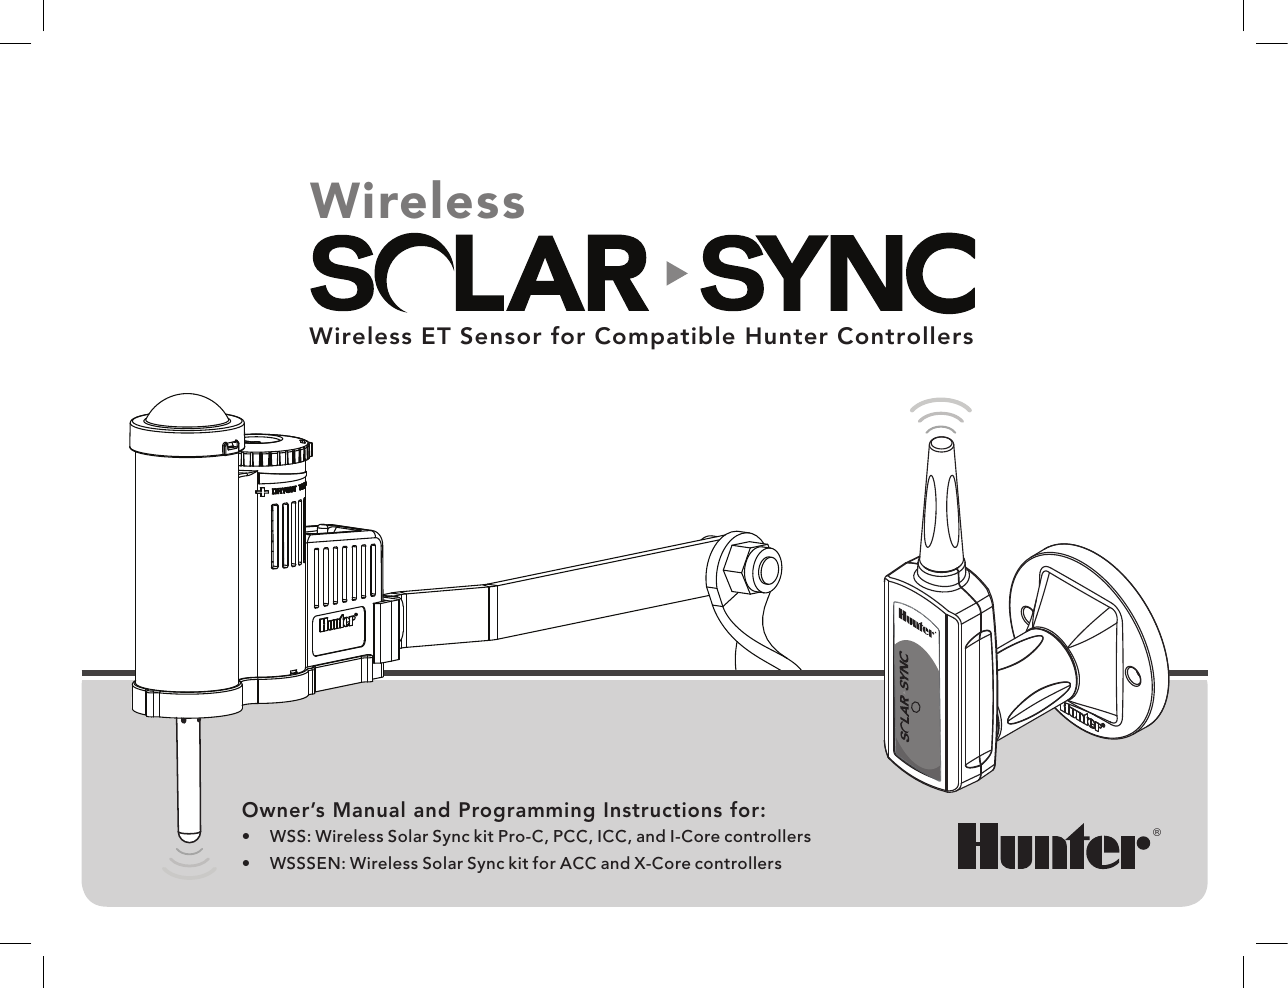 Wireless ET Sensor for Compatible Hunter ControllersWireless®Owner’s Manual and Programming Instructions for:•  WSS: Wireless Solar Sync kit Pro-C, PCC, ICC, and I-Core controllers•  WSSSEN: Wireless Solar Sync kit for ACC and X-Core controllers